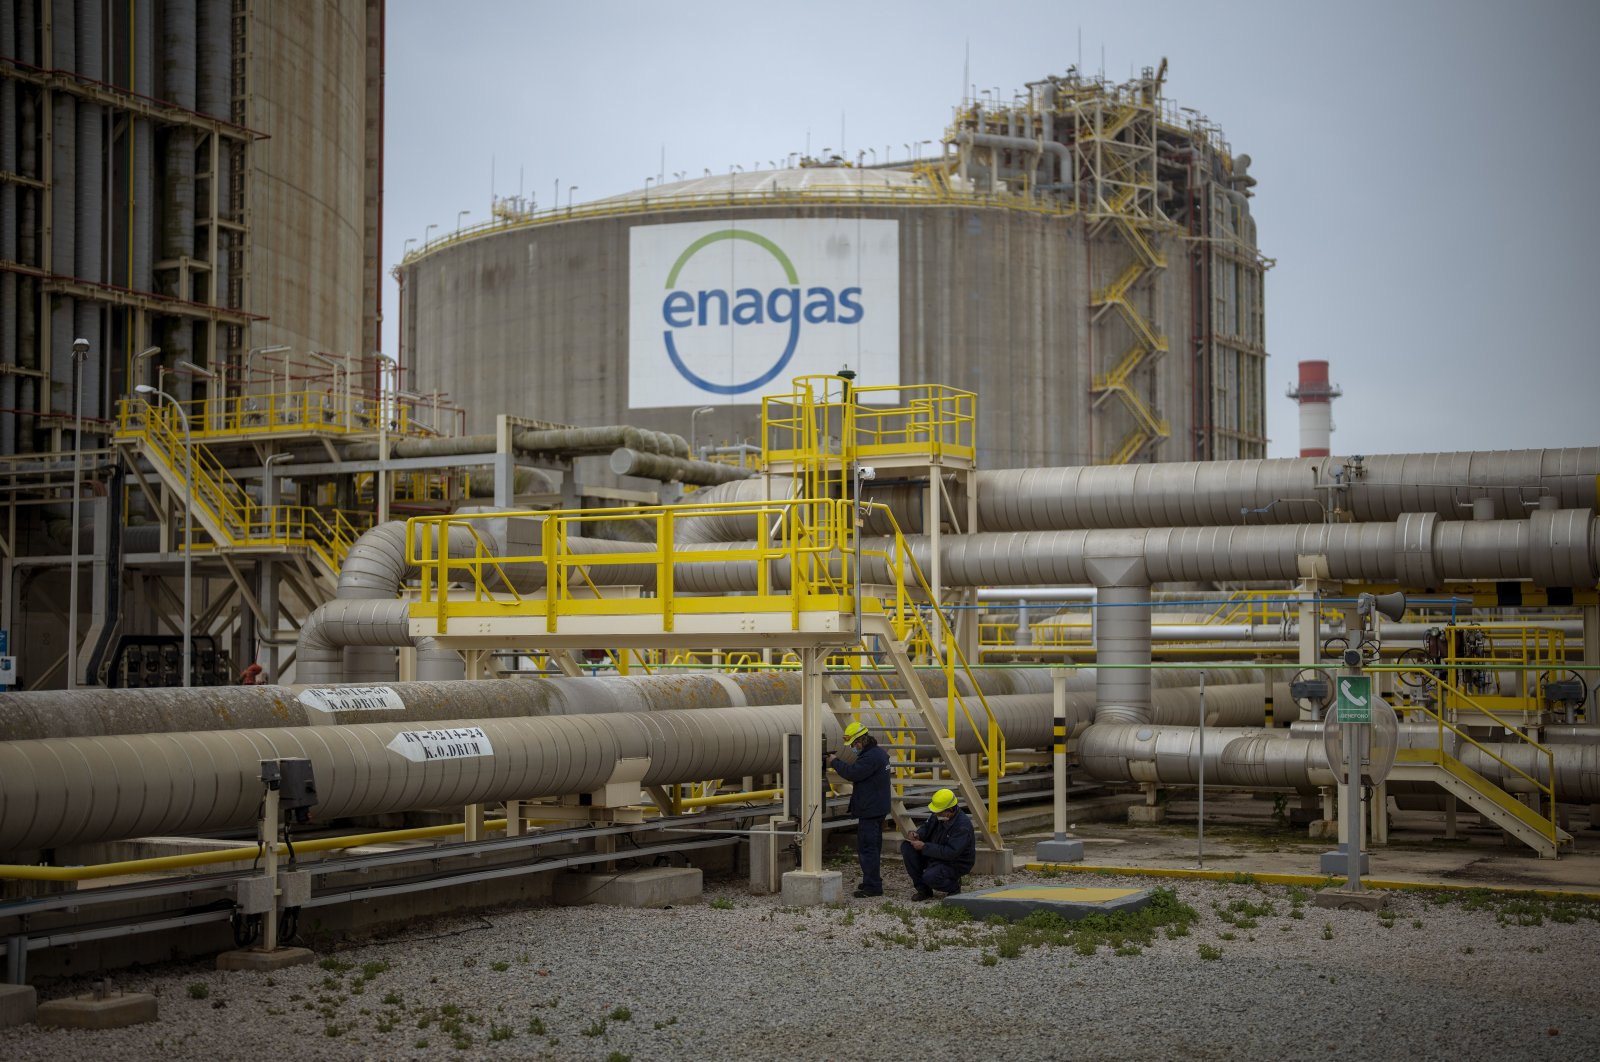 Operators work at the Enagss regasification plant, the largest LNG plant in Europe, in Barcelona, Spain, March 29, 2022. (AP Photo)